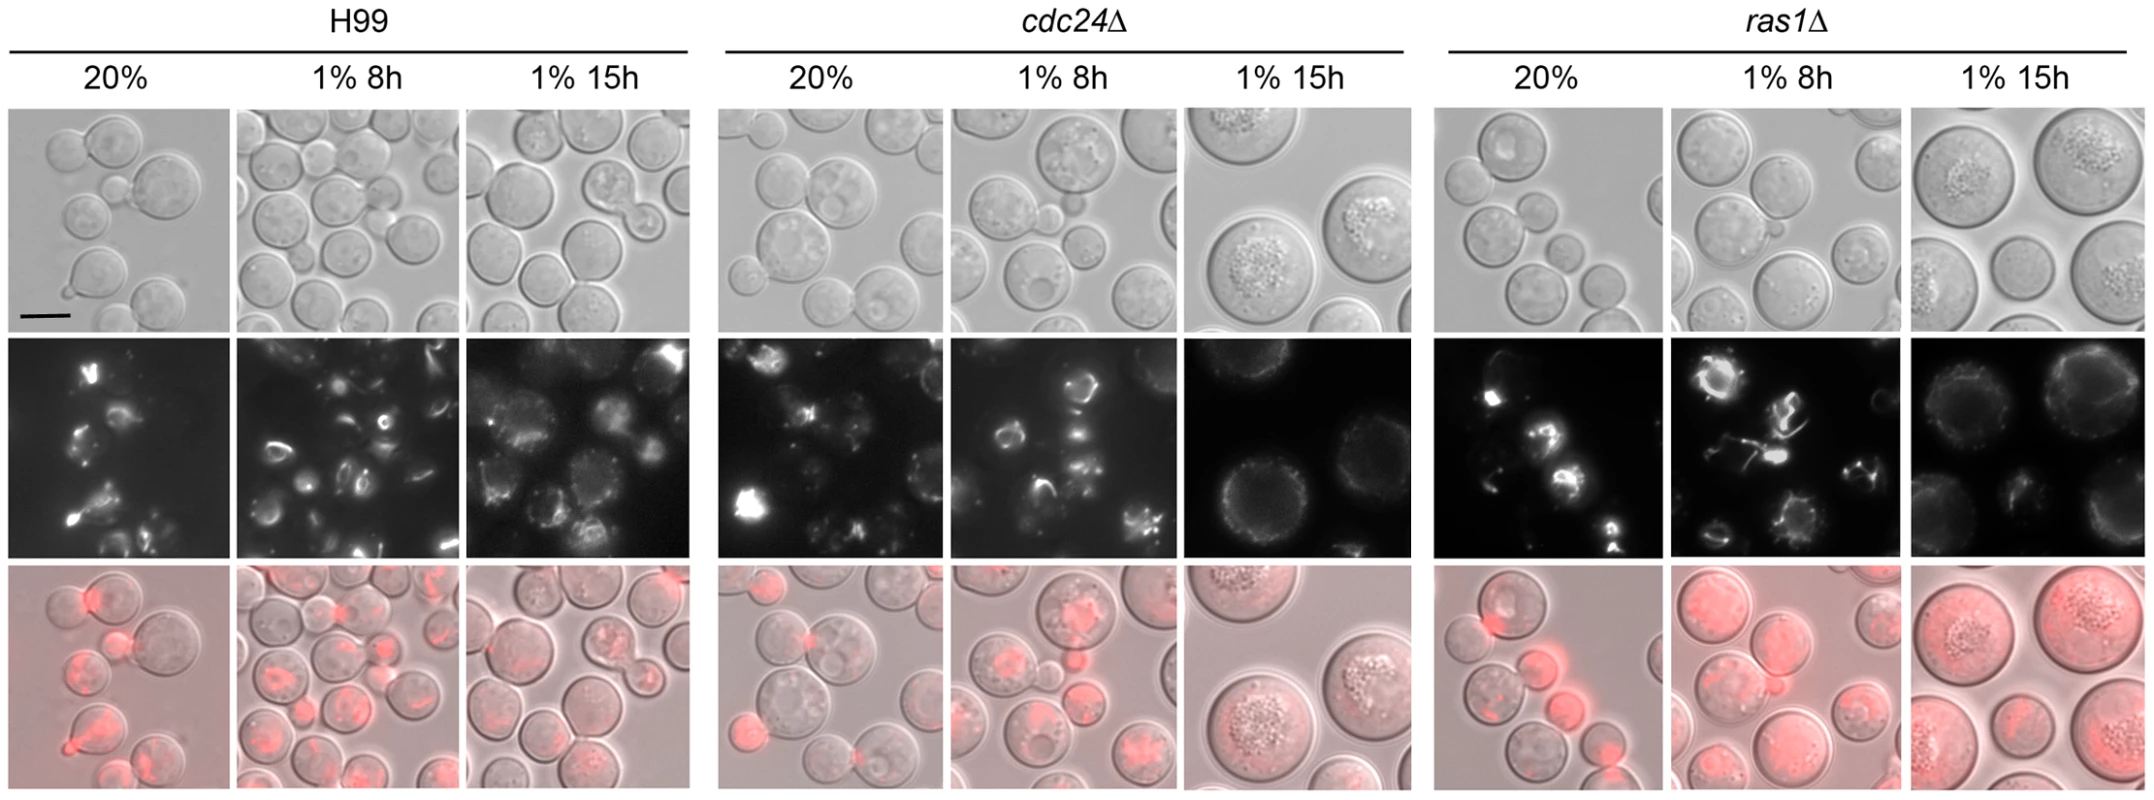 Actin polarization is not clearly influenced by <i>cdc24Δ</i> and <i>ras1Δ</i> in hypoxic conditions.